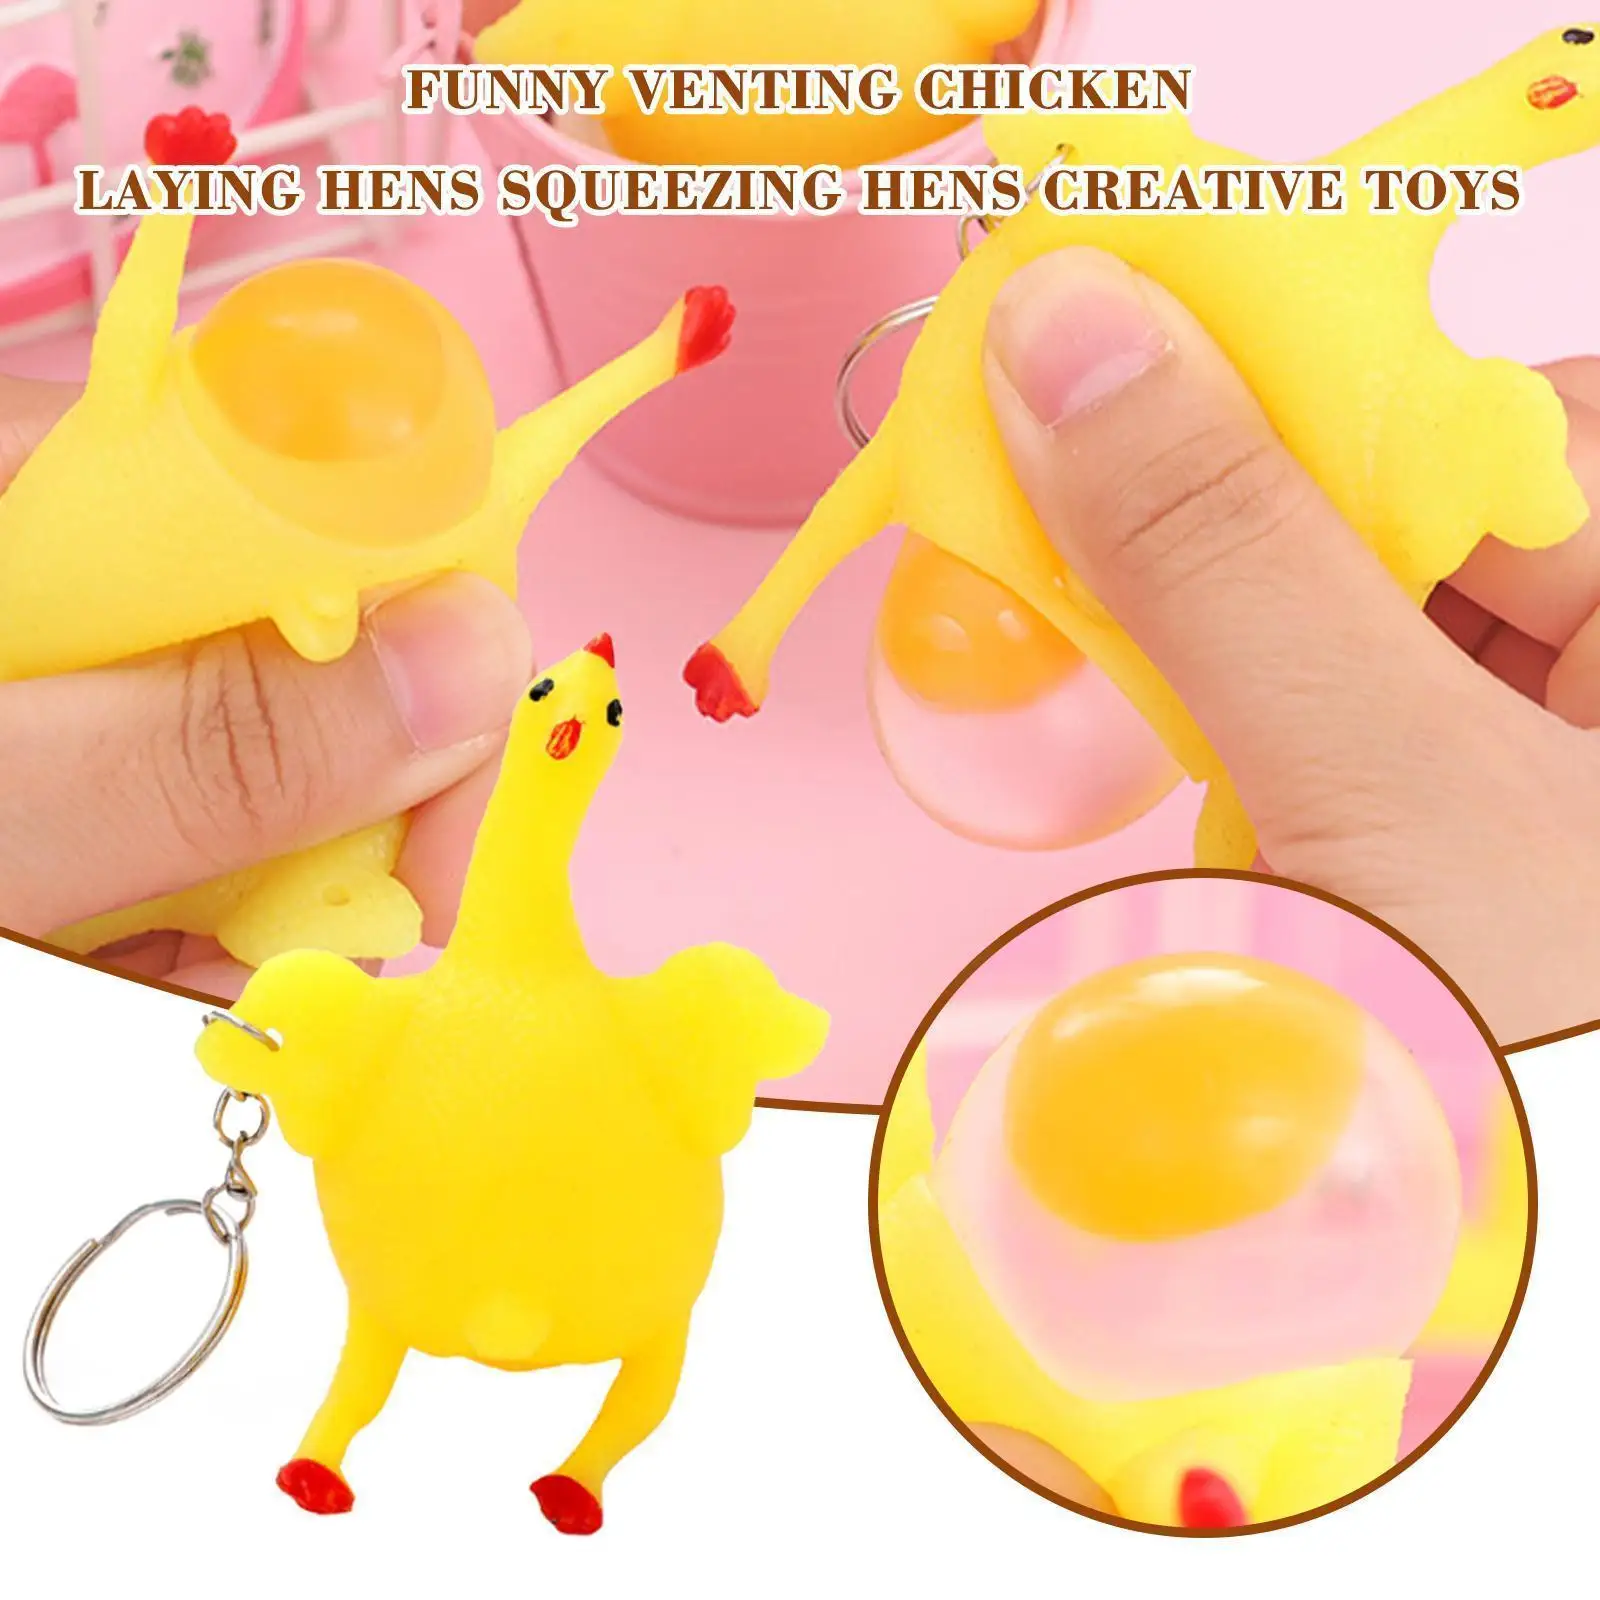 

Novelty Funny Chicken Egg Laying Hens Anti Stress Squeeze Toys Laying Relief O4c8 Gadgets Chicken Keychain Str Gifts Squeez D7g9